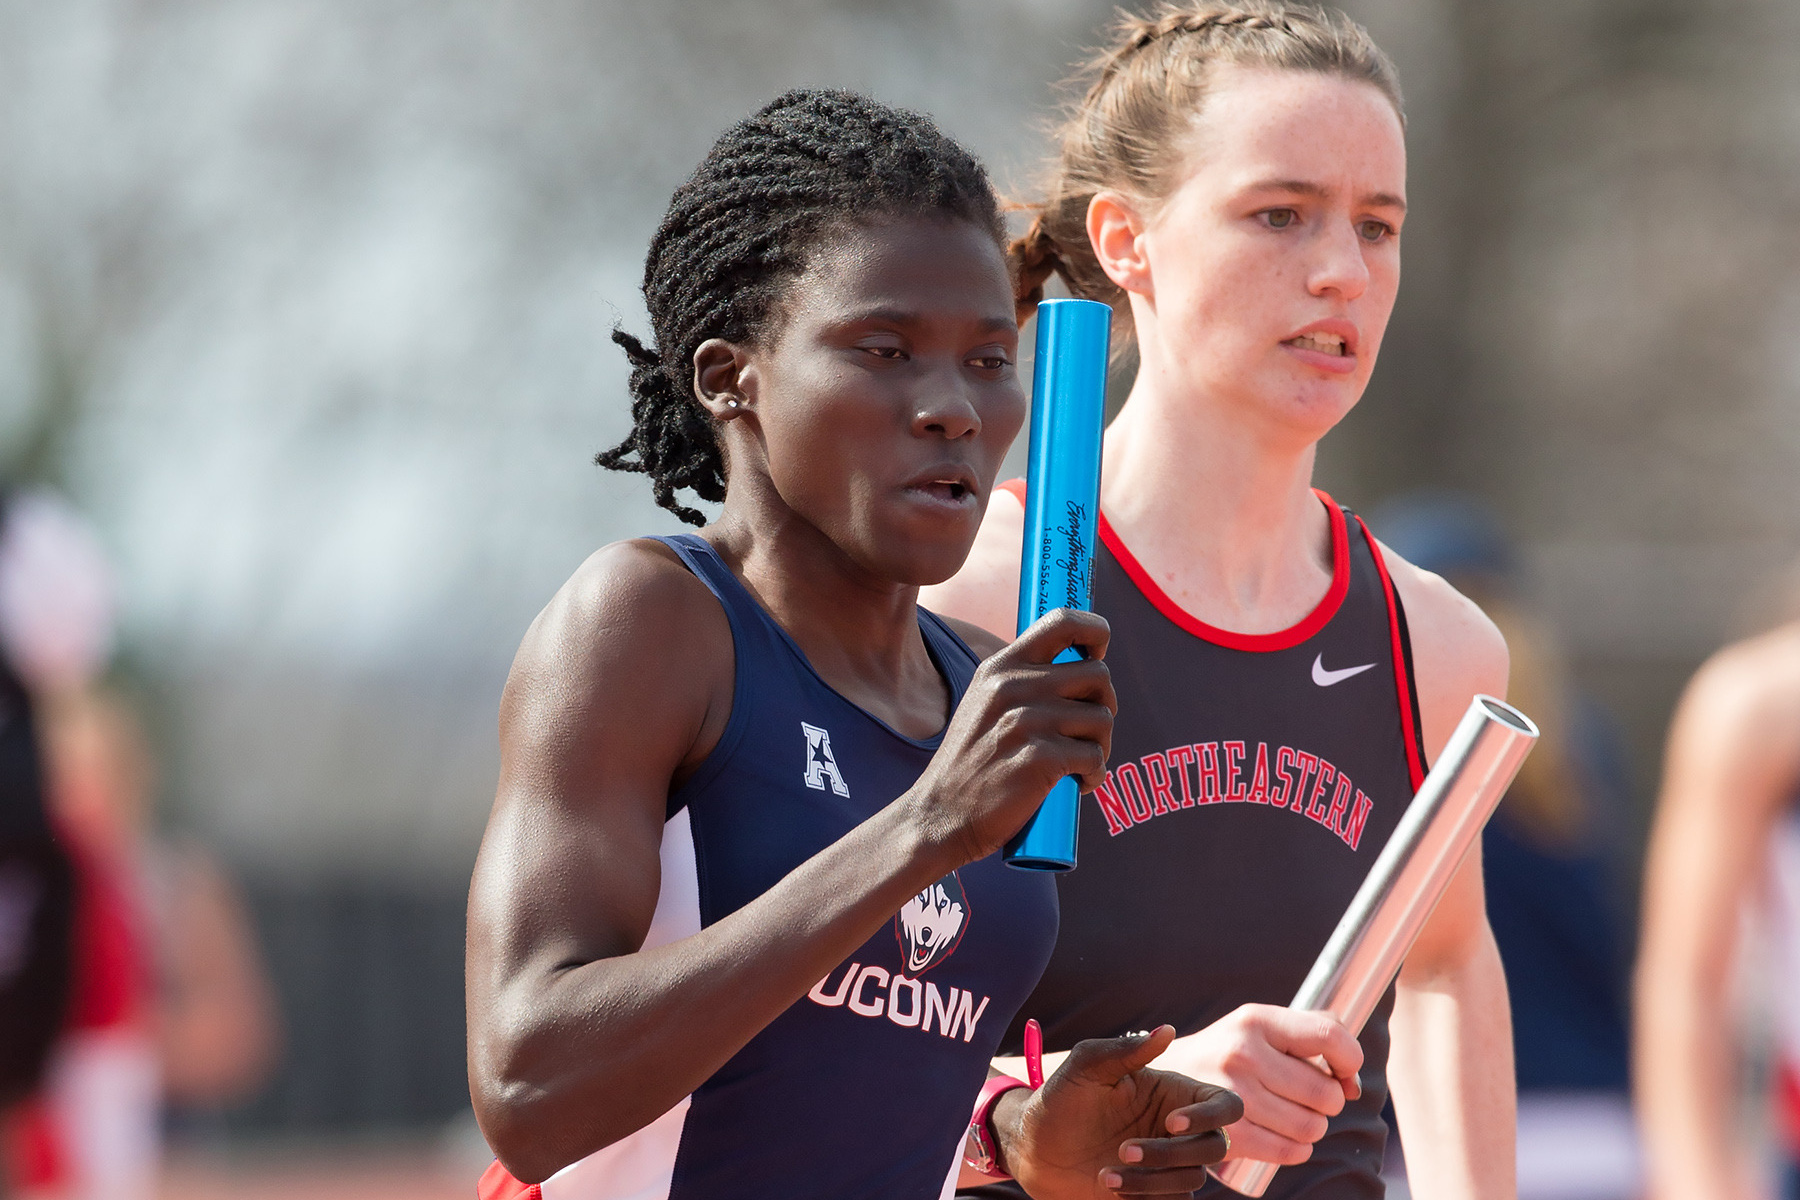 Sophomore Susan Aneno is traveling this week to Eugene, Ore. to compete in the NCAA Division I Outdoor Track and Field Championships. (J.J. Clark/UConn Photo)